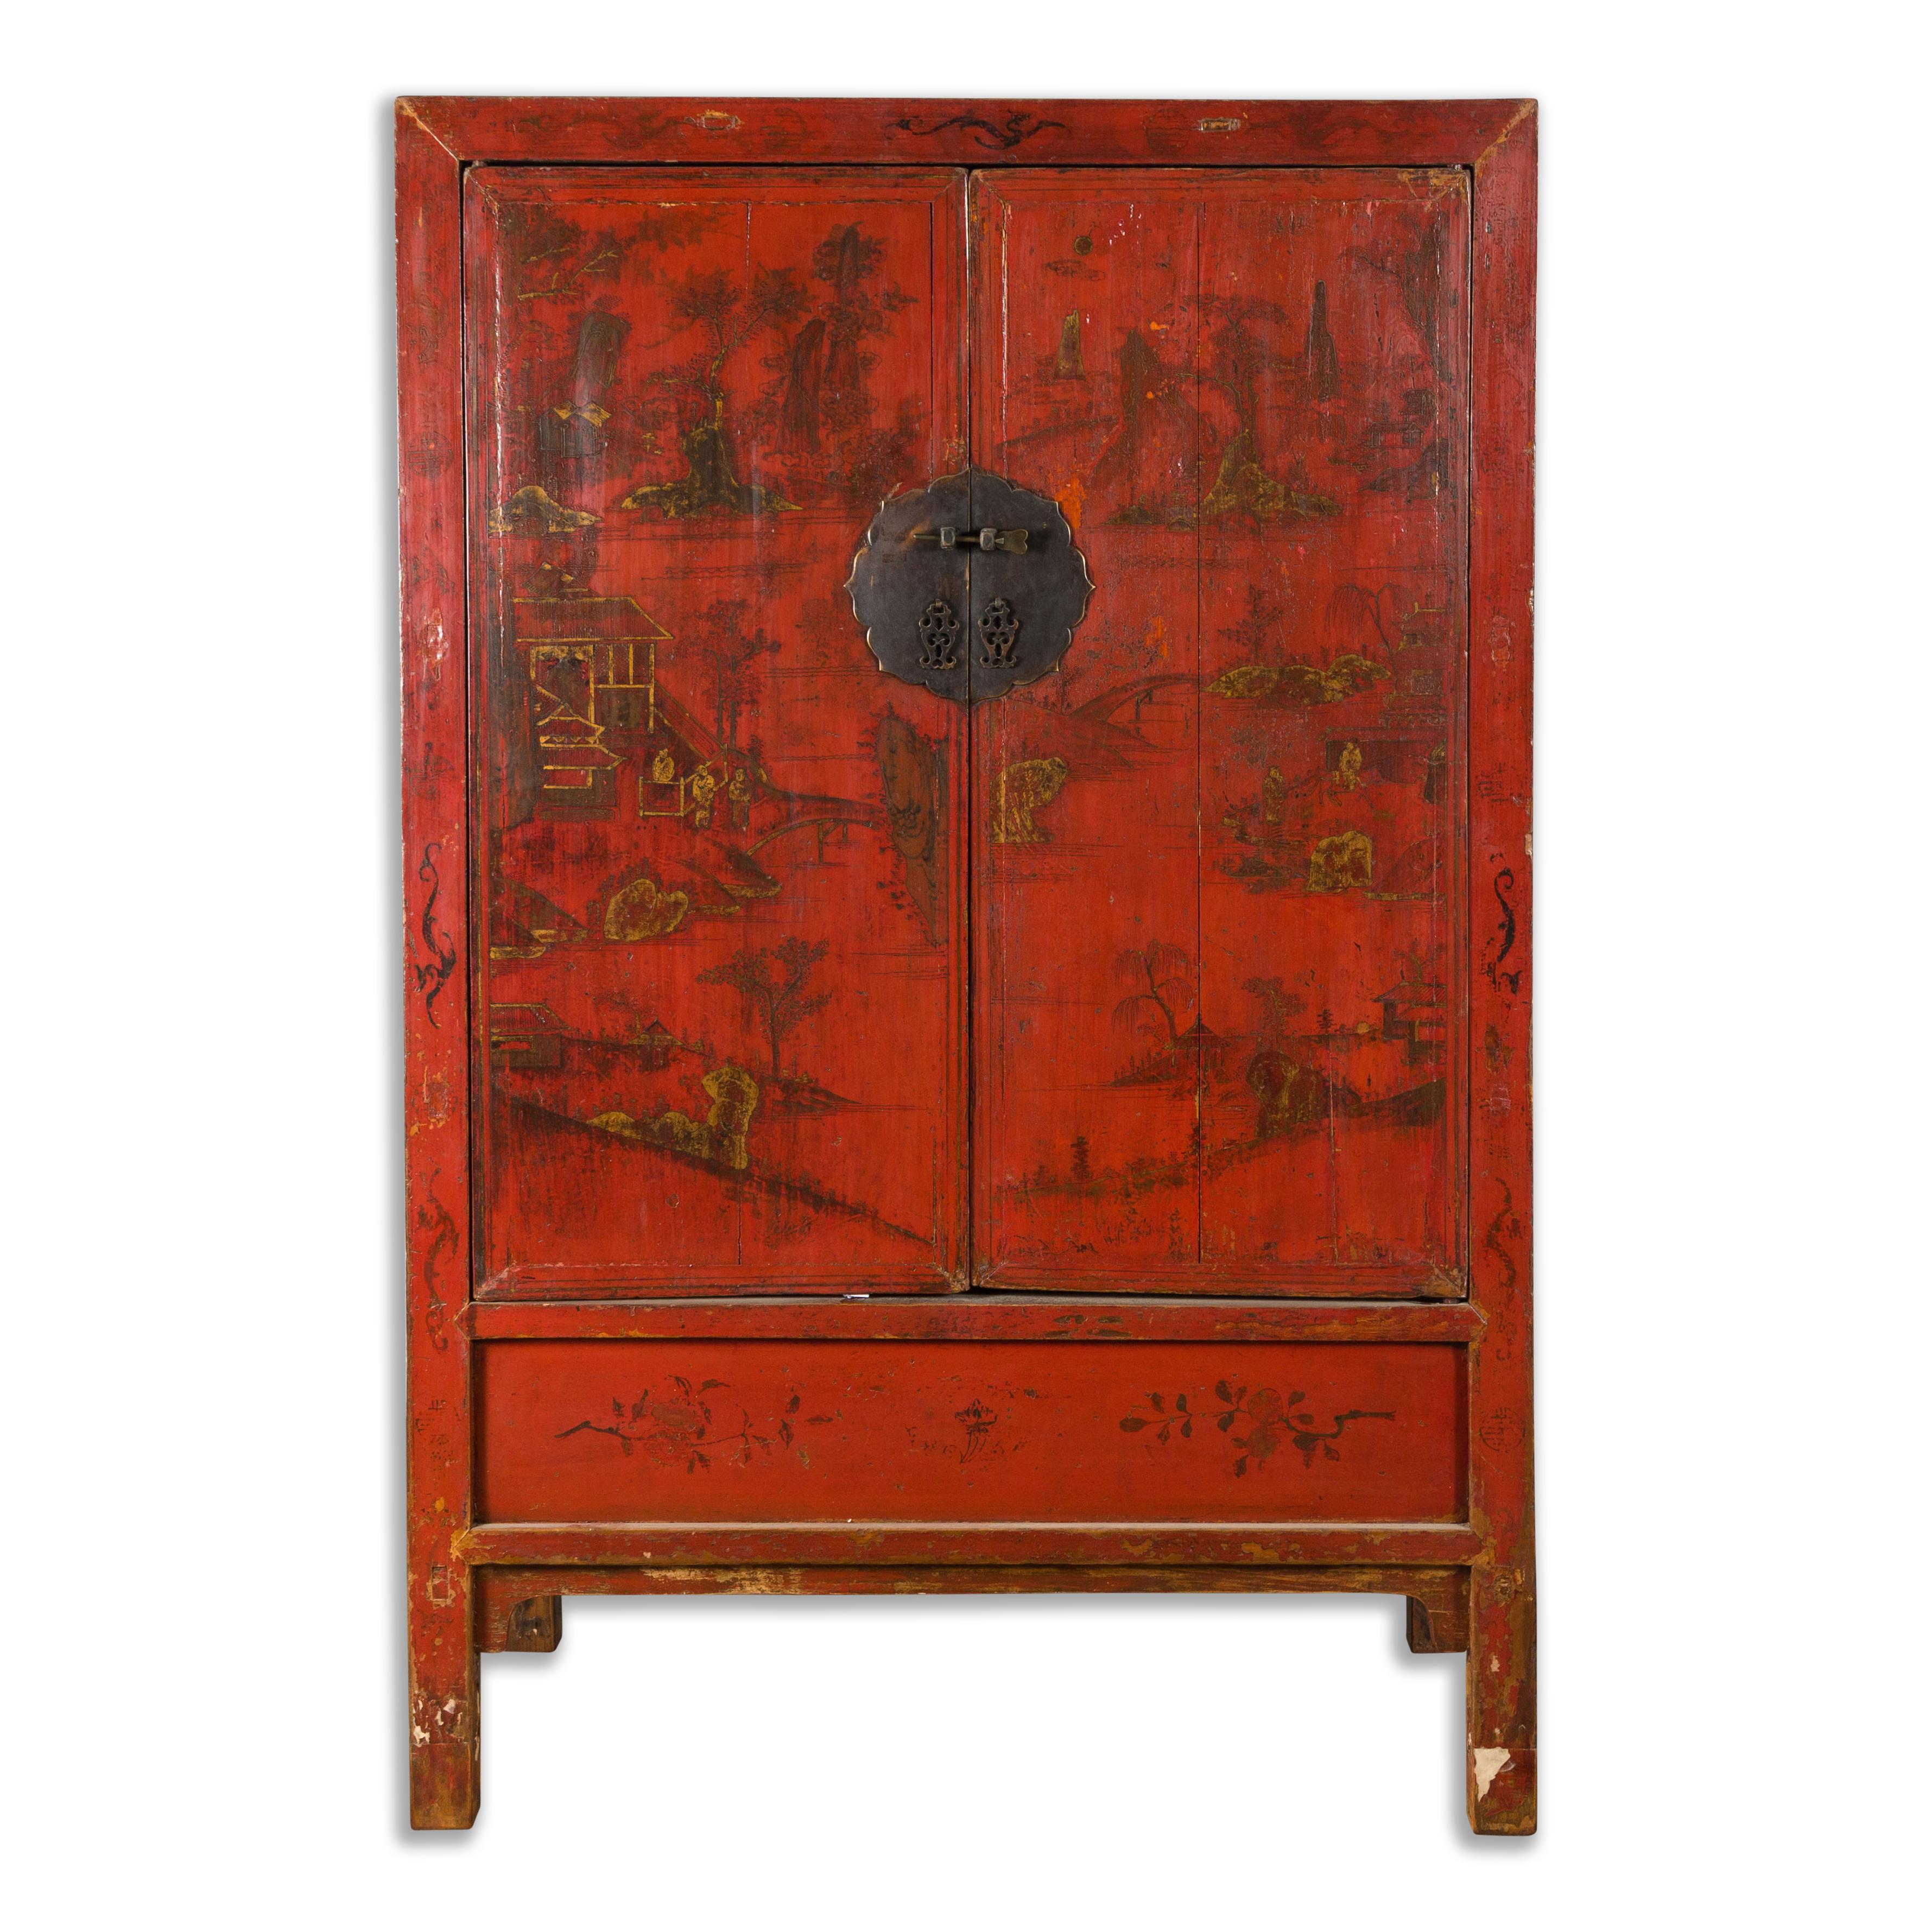 Qing Dynasty 19th Century Hand-Painted Cabinet with Original Red Lacquer For Sale 9